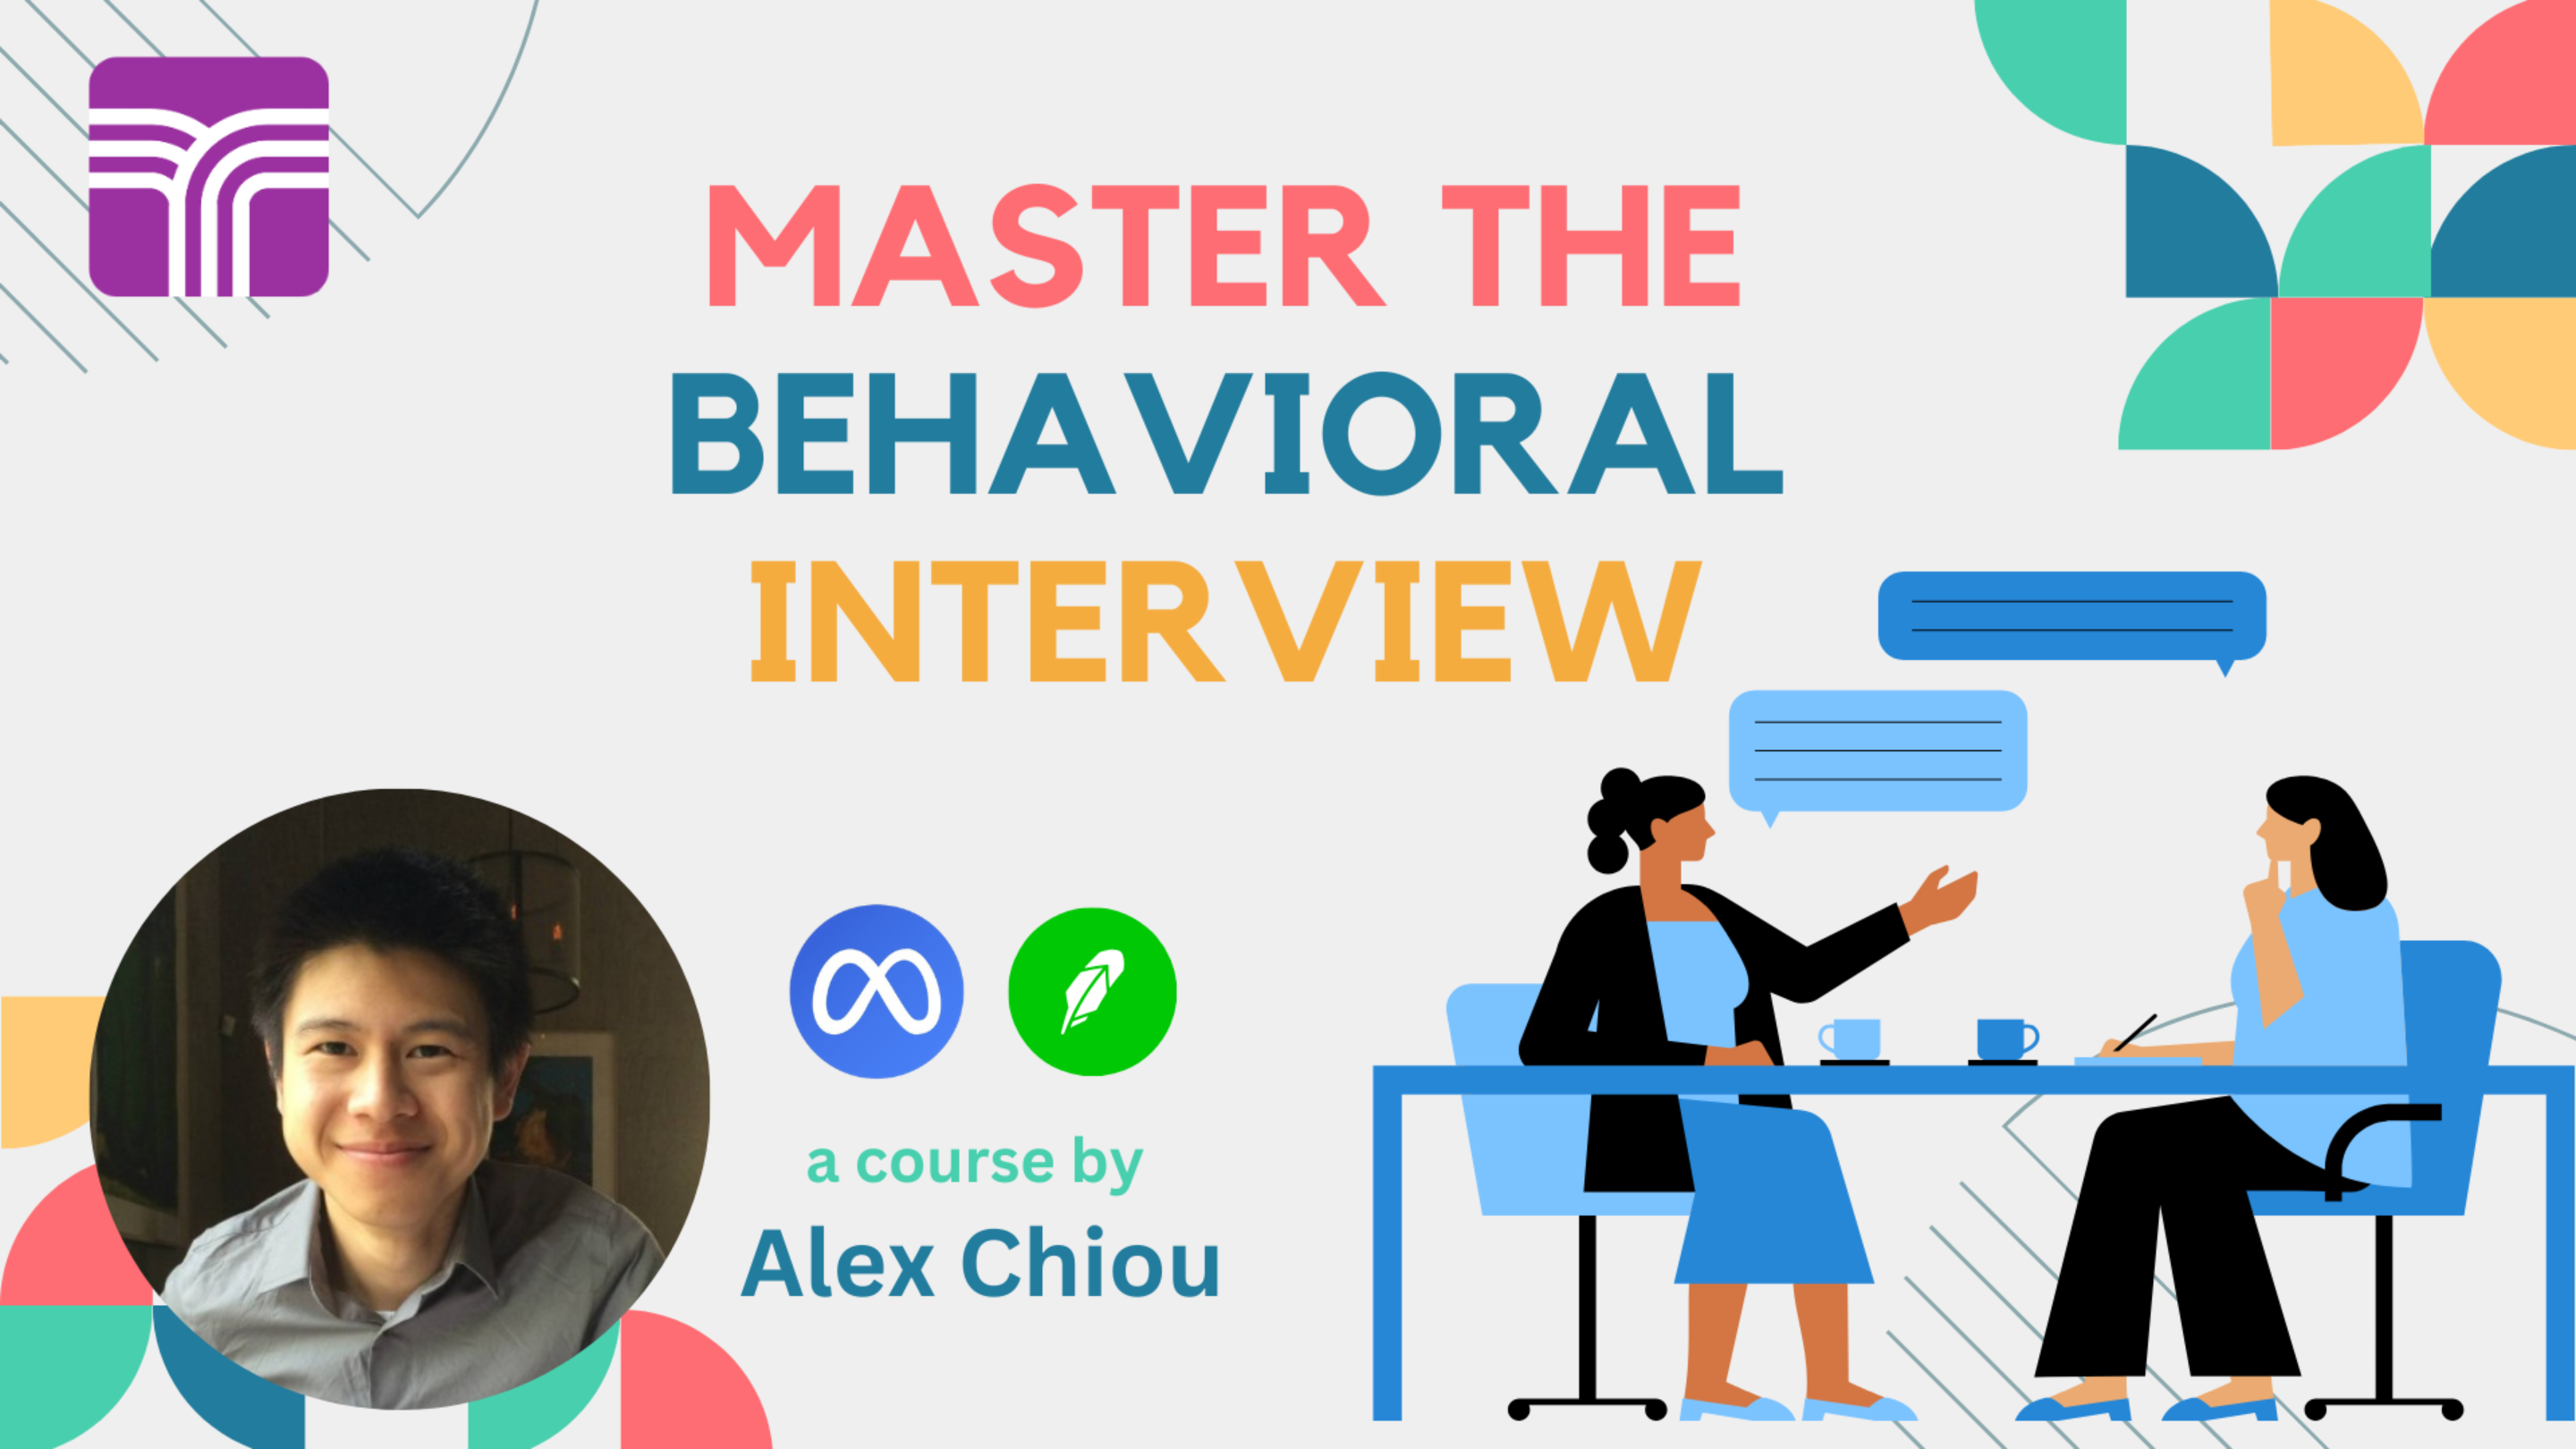 Master The Behavioral Interview As A Software Engineer poster